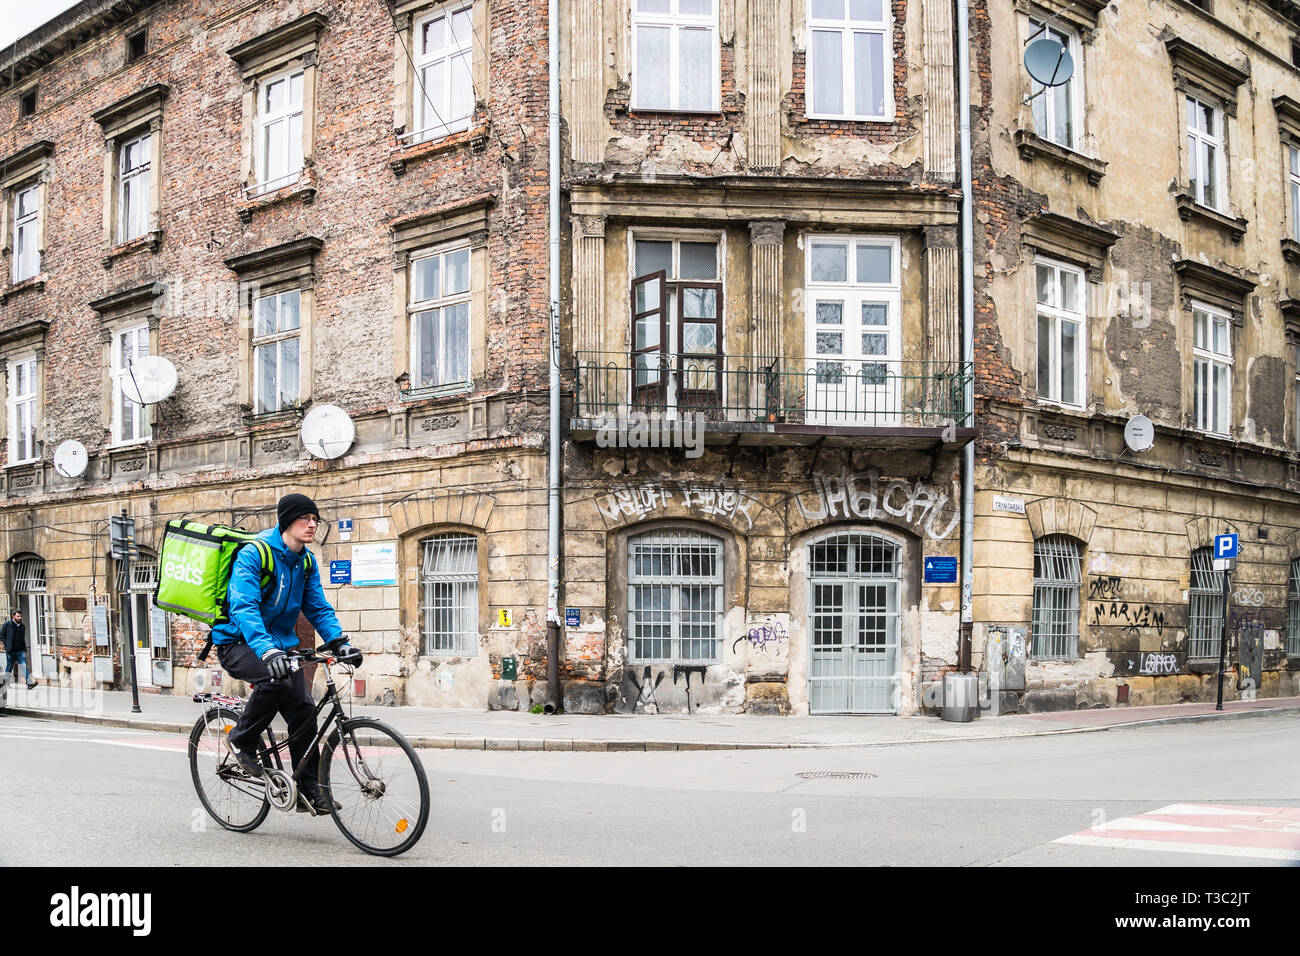 Krakow, Poland - March 22, 2019 - Uber eats delivery man in a cycle on an old town street Stock Photo